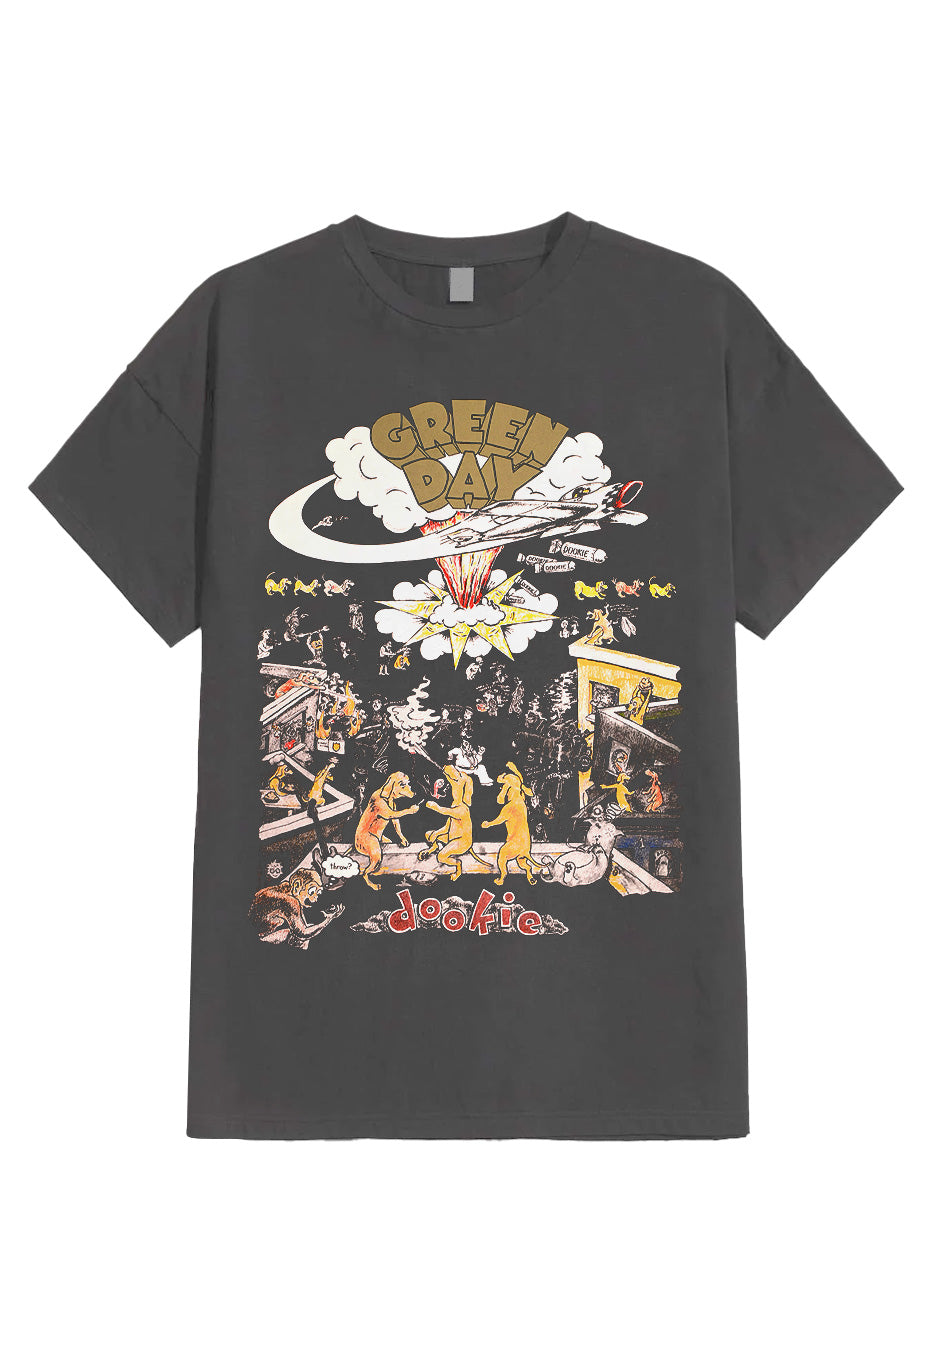 Green Day - Dookie Charcoal - T-Shirt